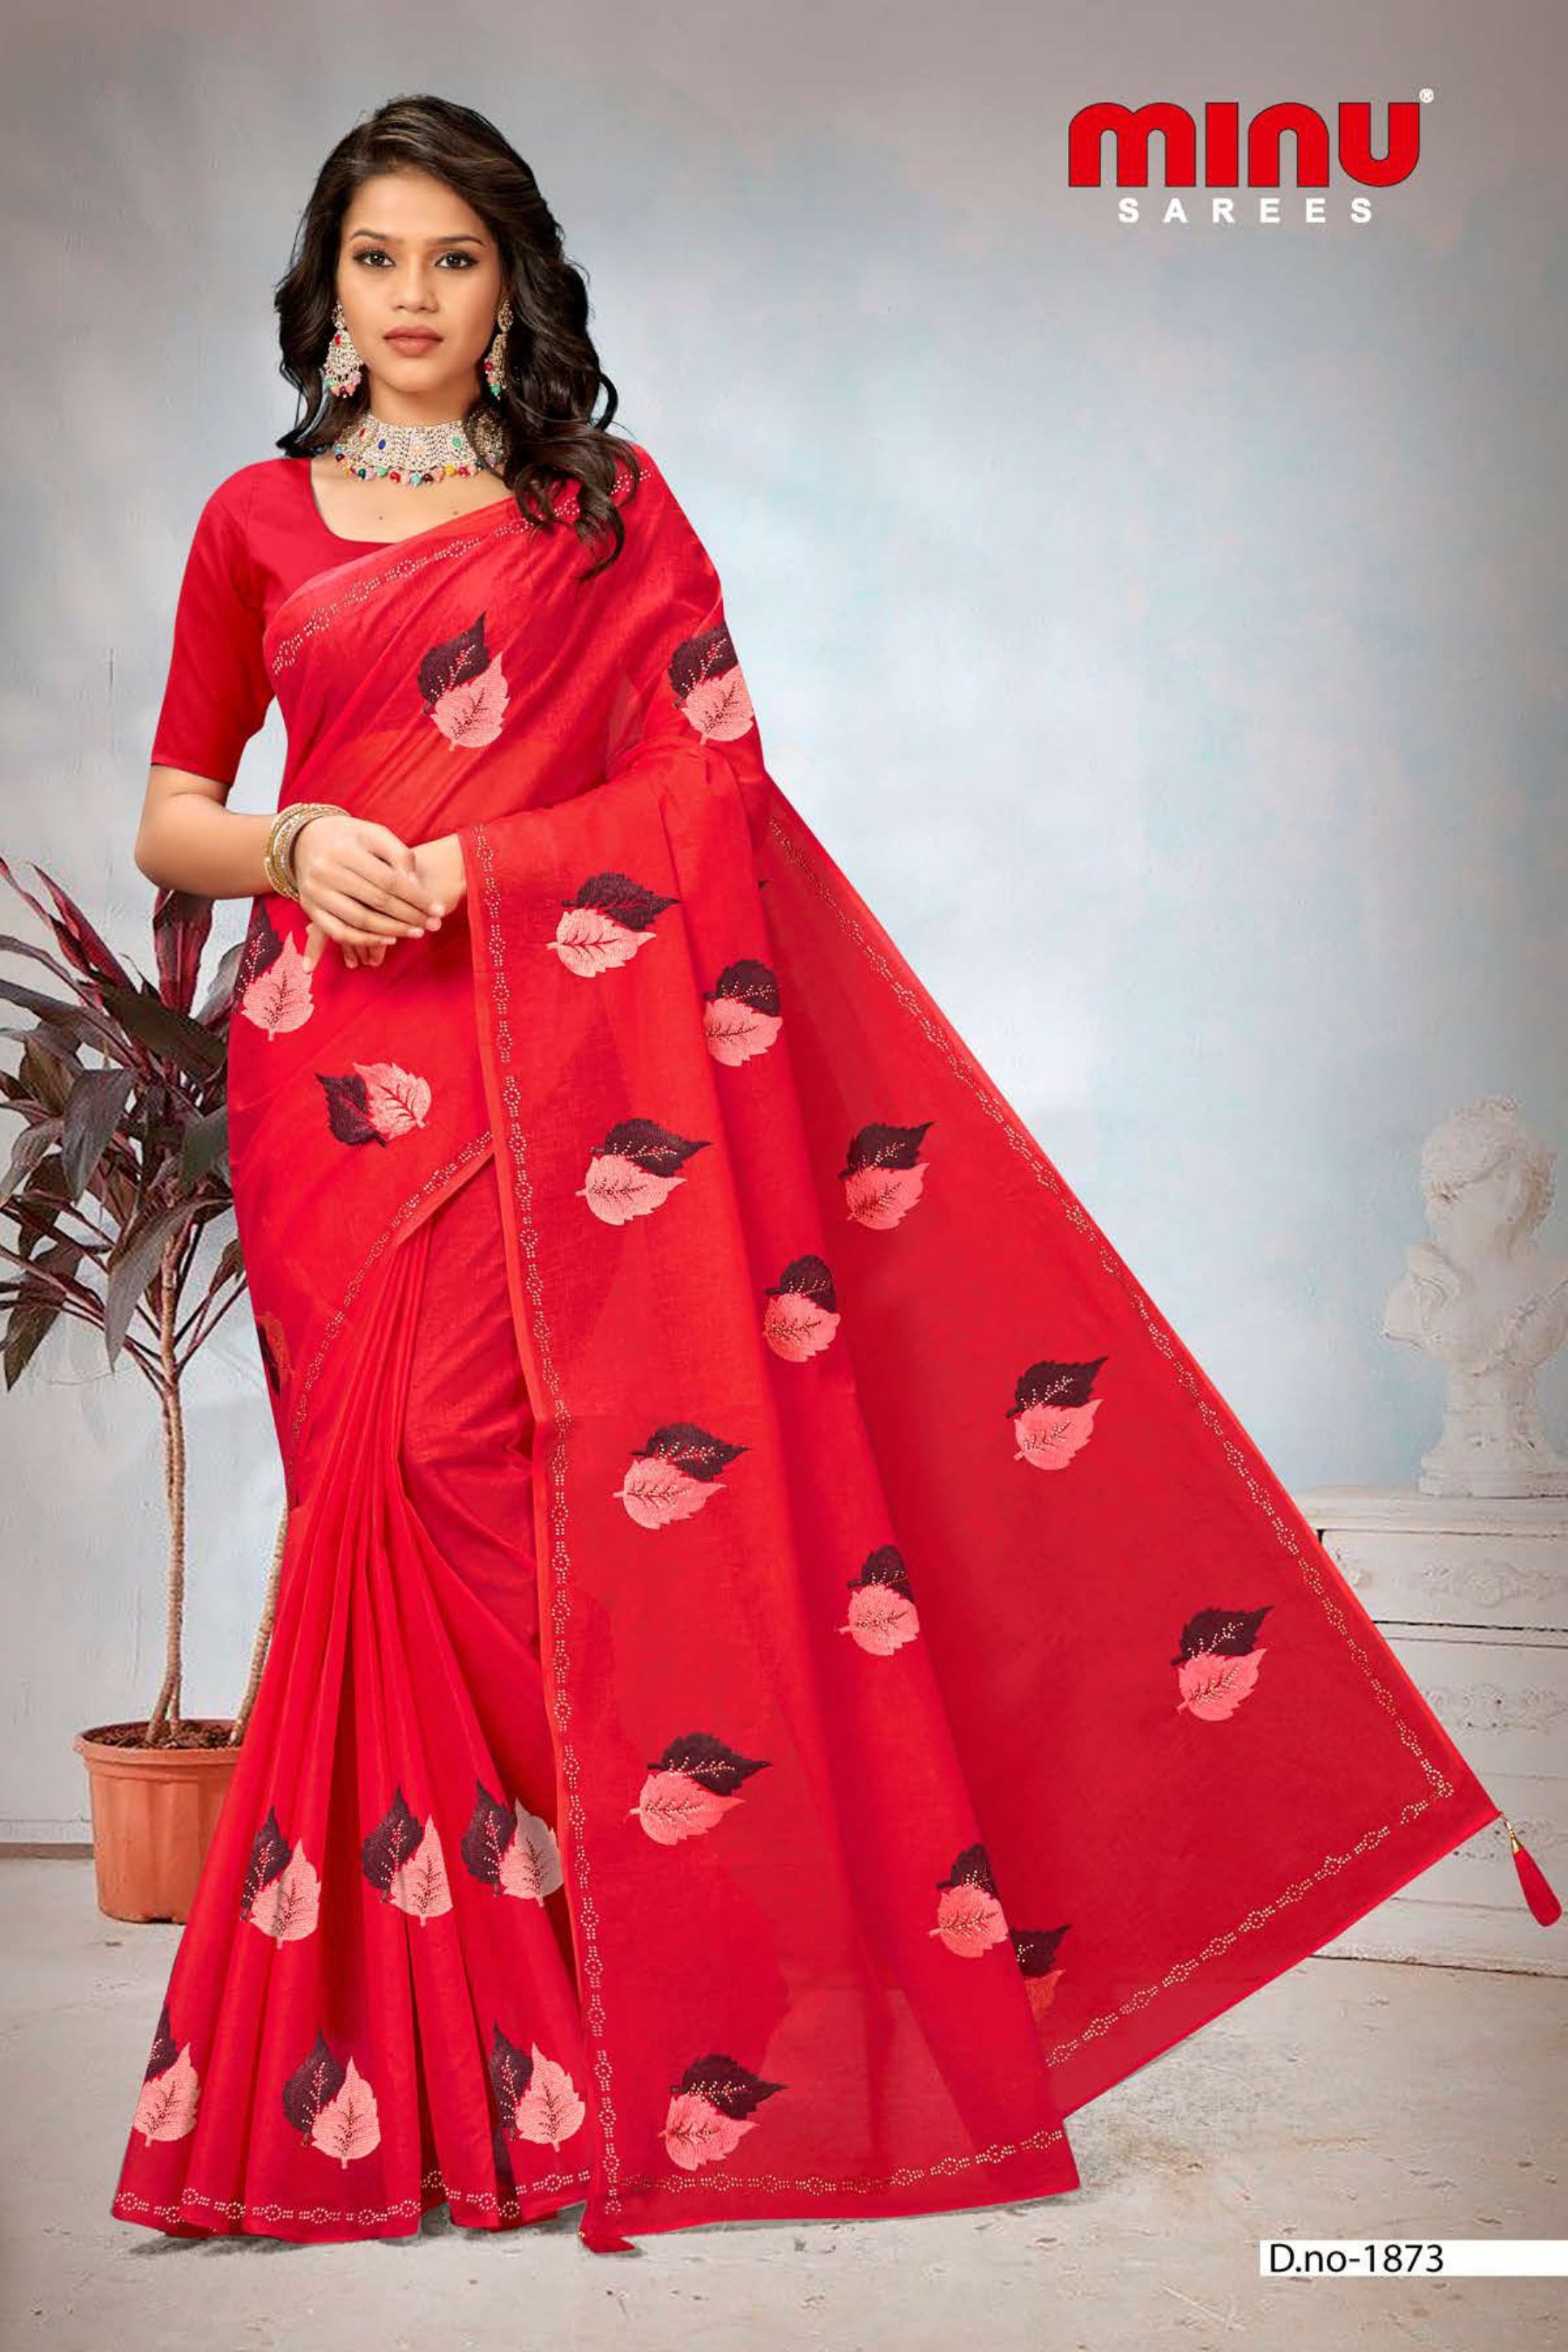 Embroidered saree Durga puja special wearing woman 